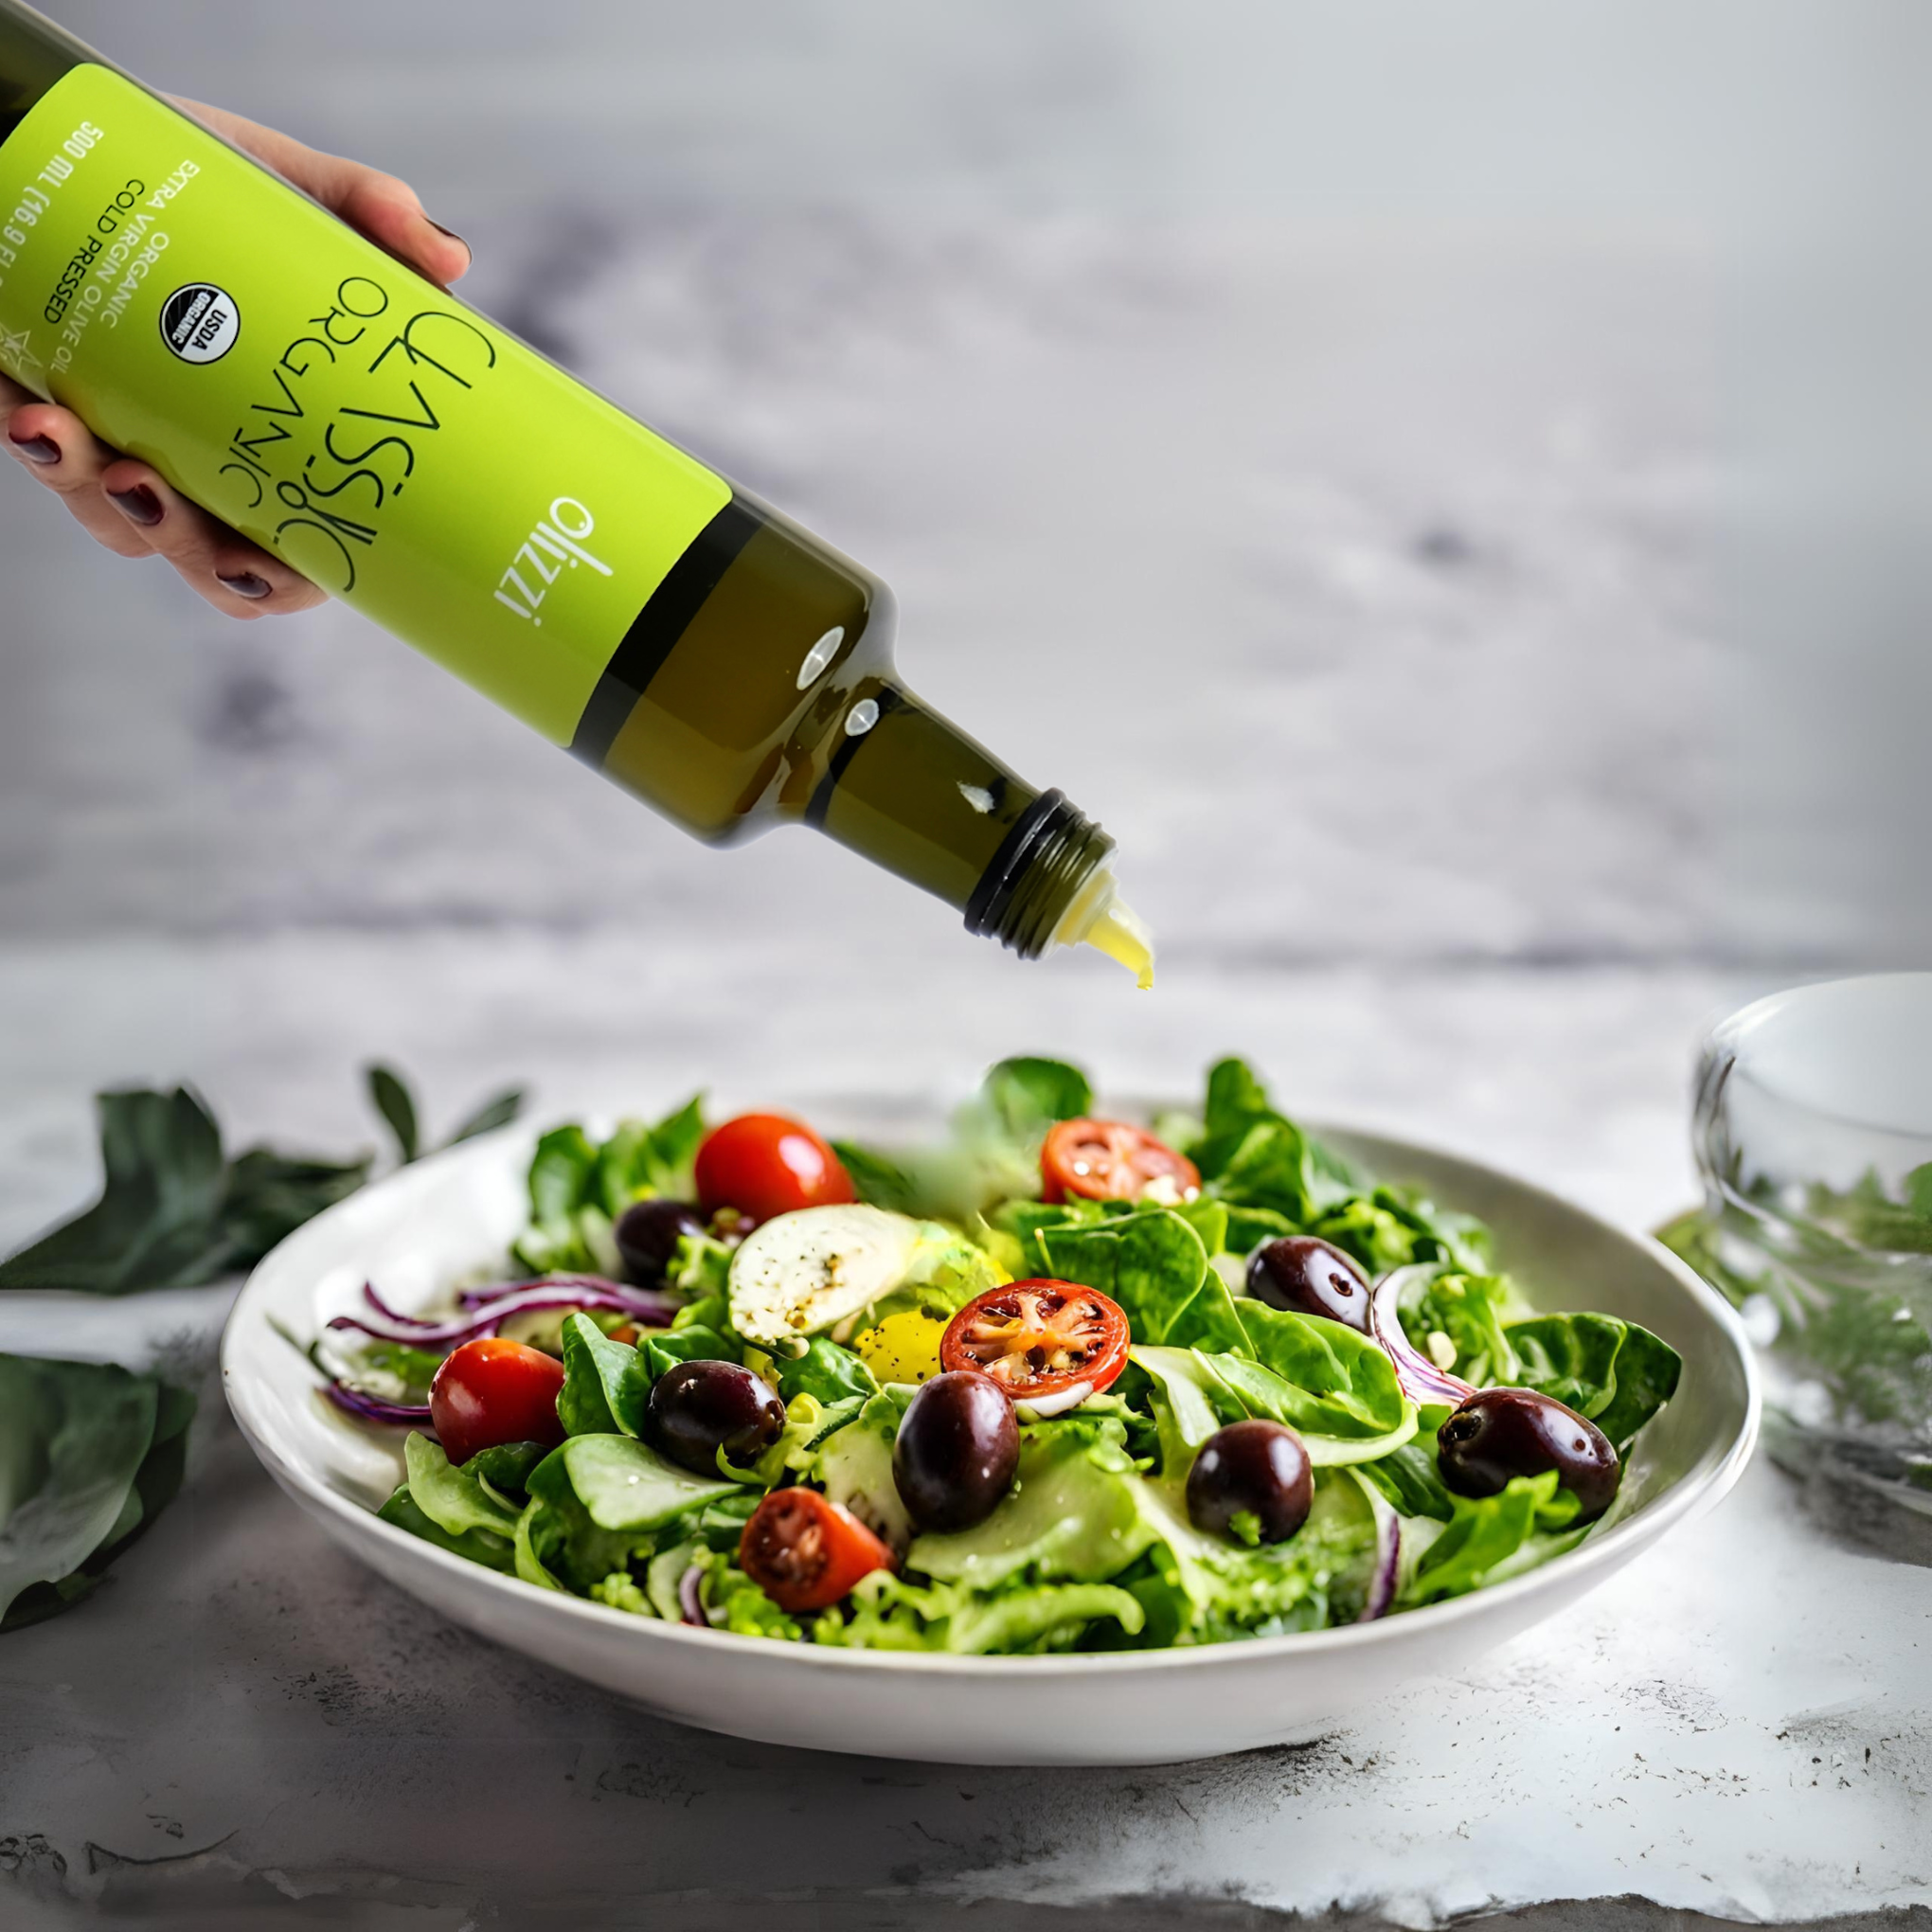 Olizzi Classic Organic Extra Virgin Olive Oil 16.9 FL OZ - Cold Pressed, New Harvest, Hand Picked, USDA Organic, Kosher, Smooth and Delicate EVOO, Salad Dressing, Aceite de Oliva